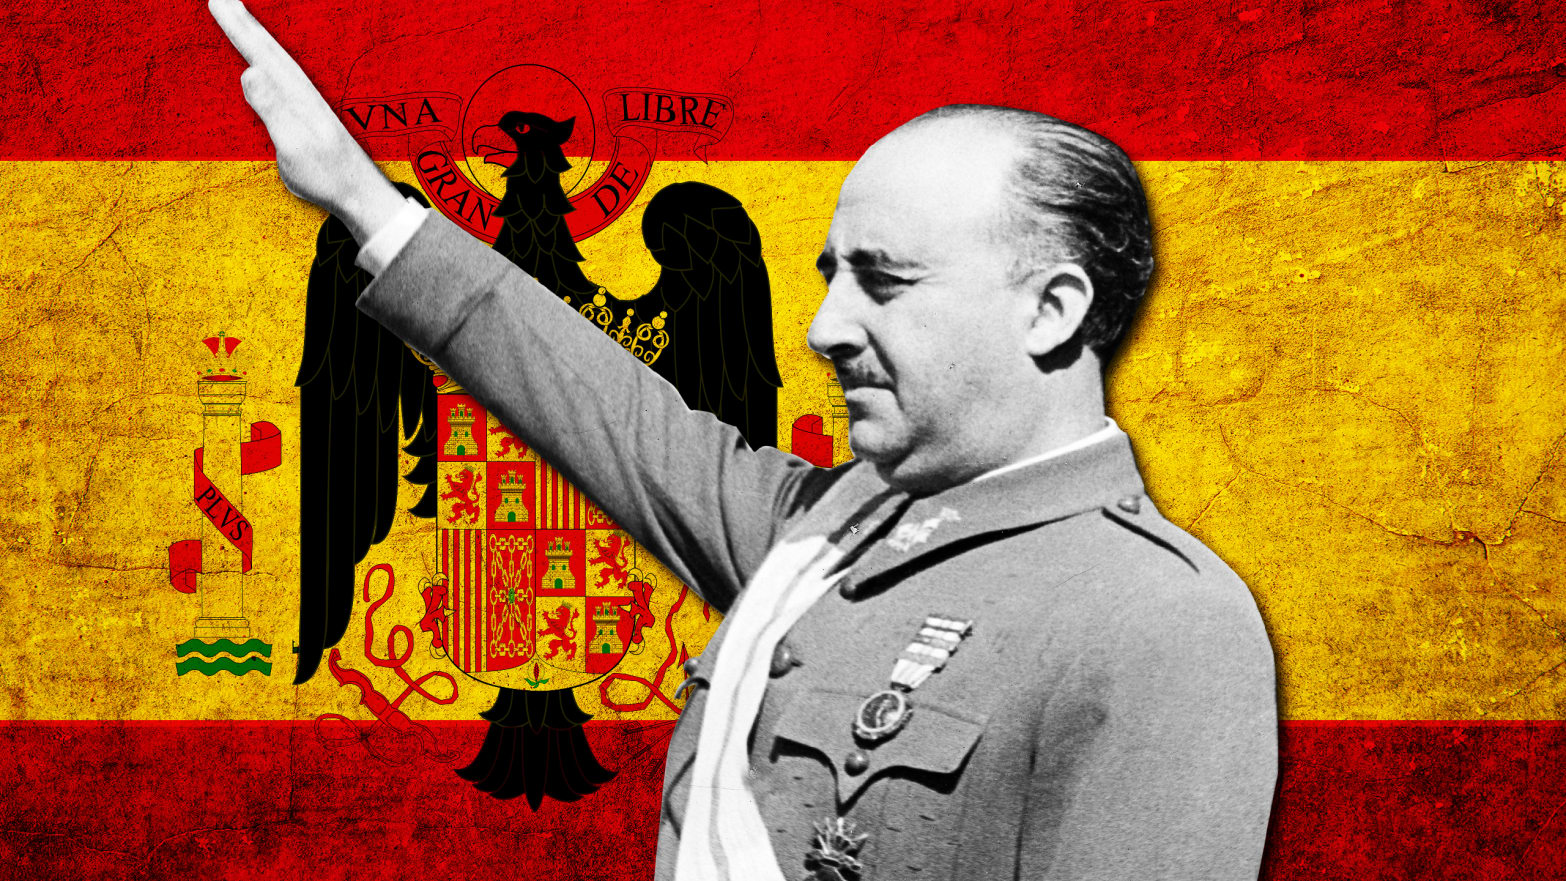 Why Spain Exhuming Francisco Franco's Body, Just as Fascism Returns to  Europe